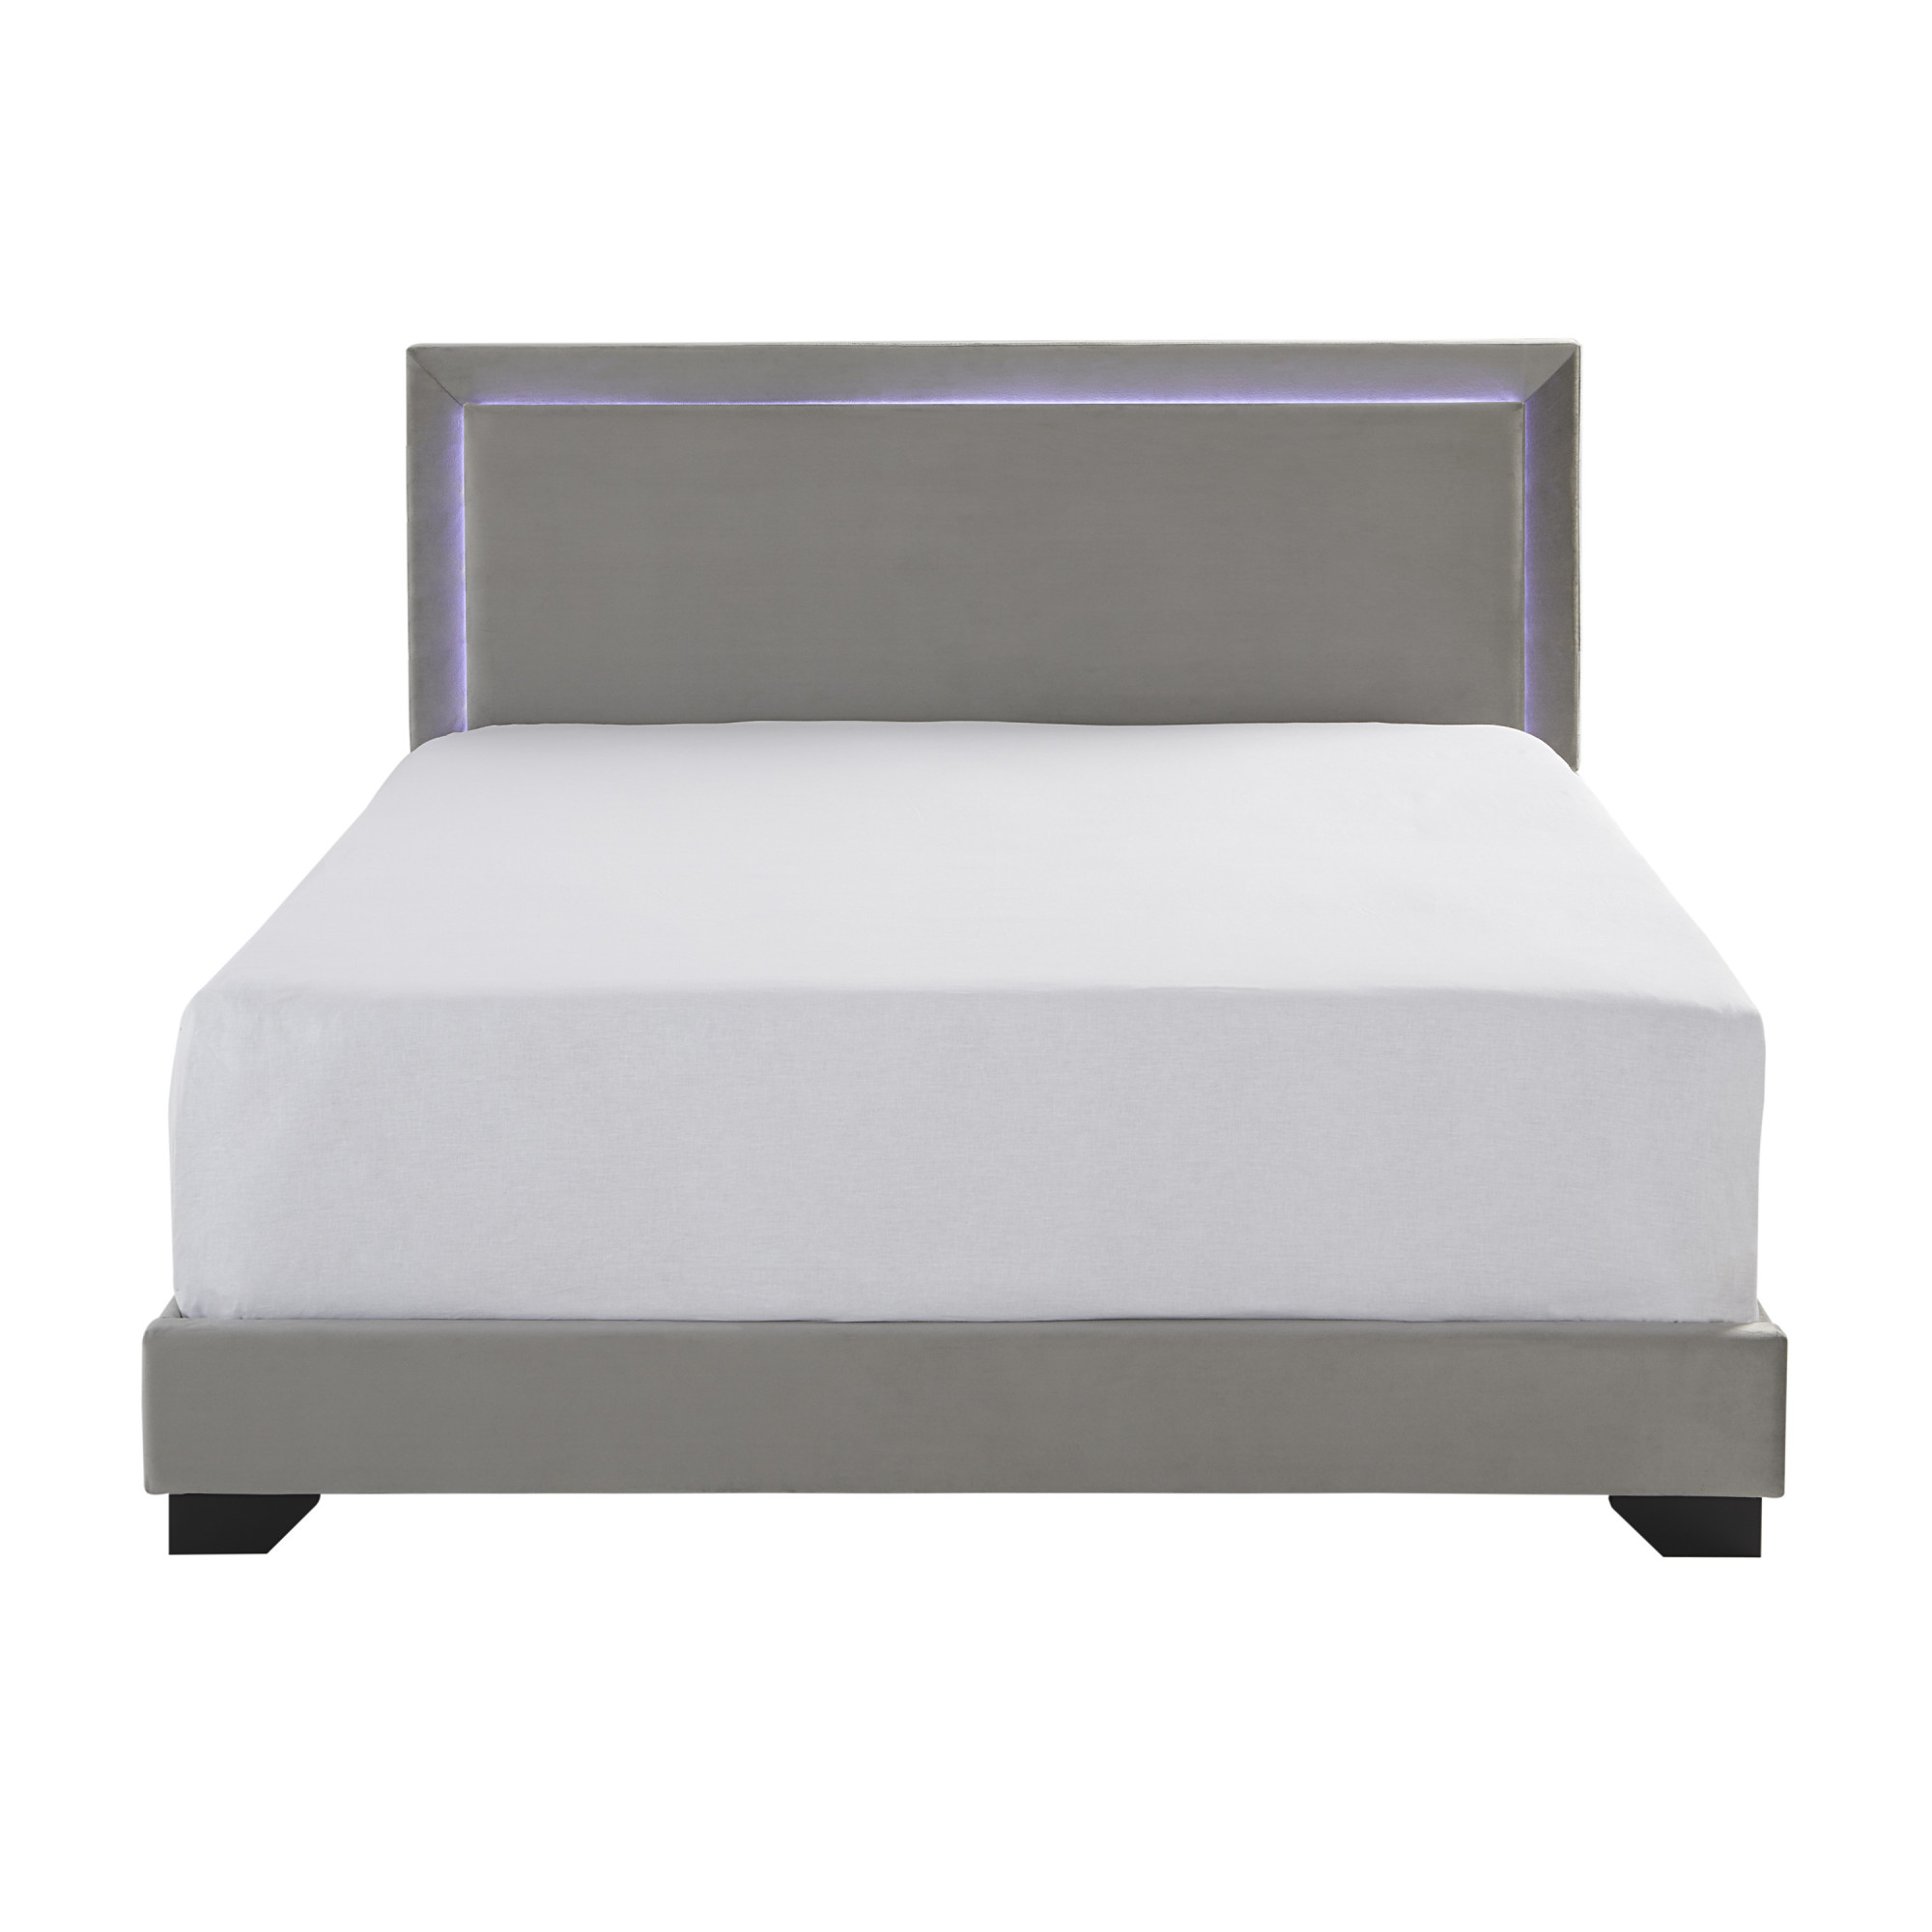 Anchorage Upholstered Queen Bed with LED Lights and USB, Platinum - image 16 of 17